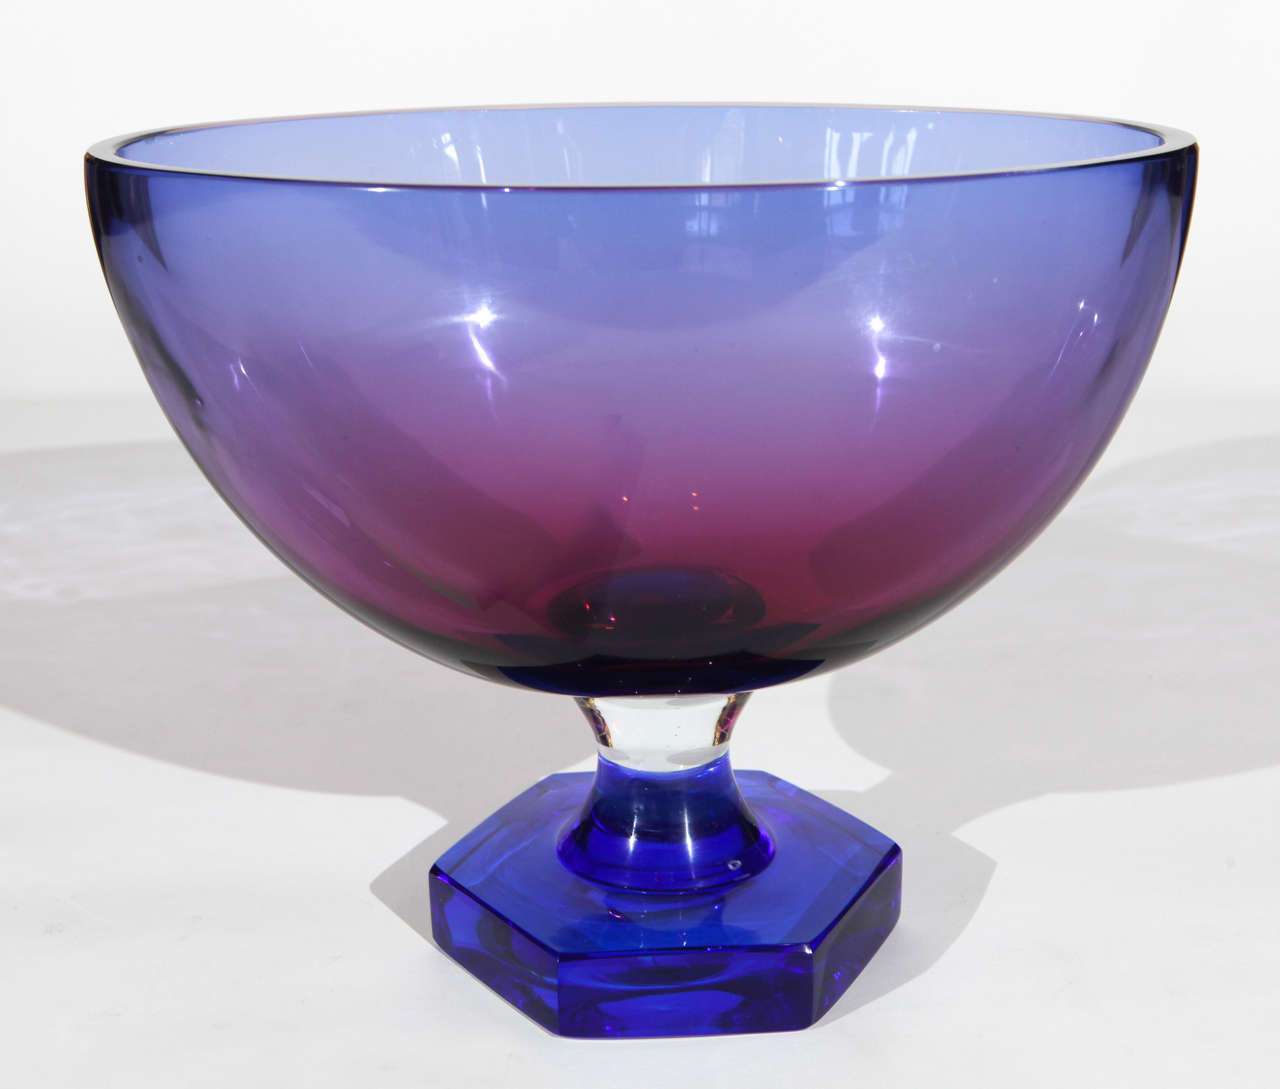 A beautiful Murano centerpiece bowl in hues of deep blue and purple. Hexagonal base with an oval shaped bowl.